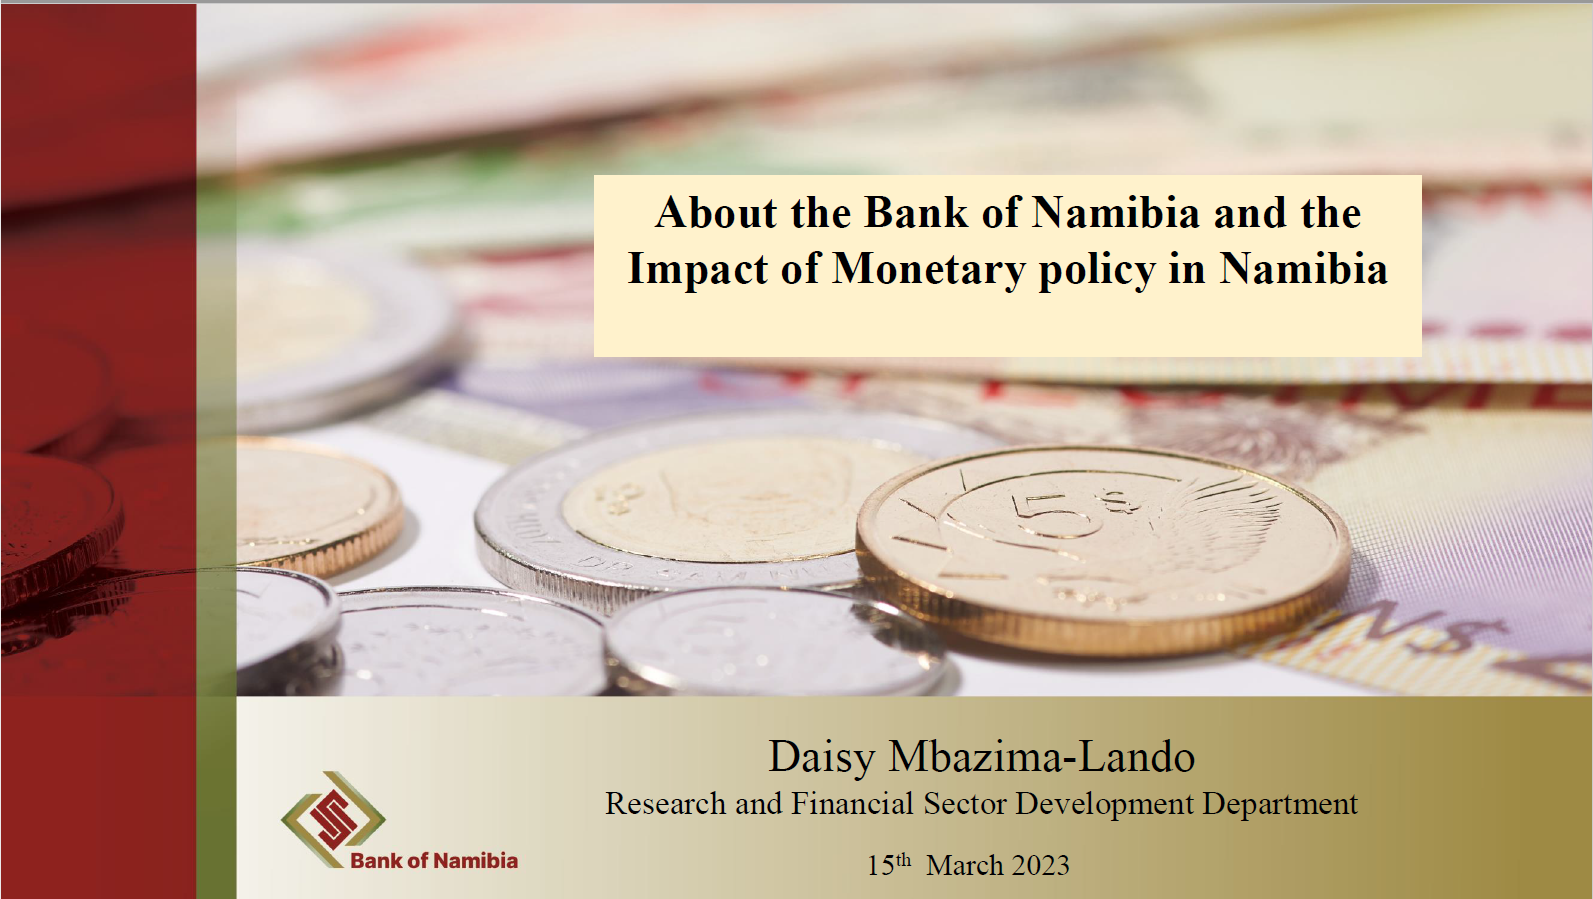 Role of the Bank of Namibia and Repo Rate